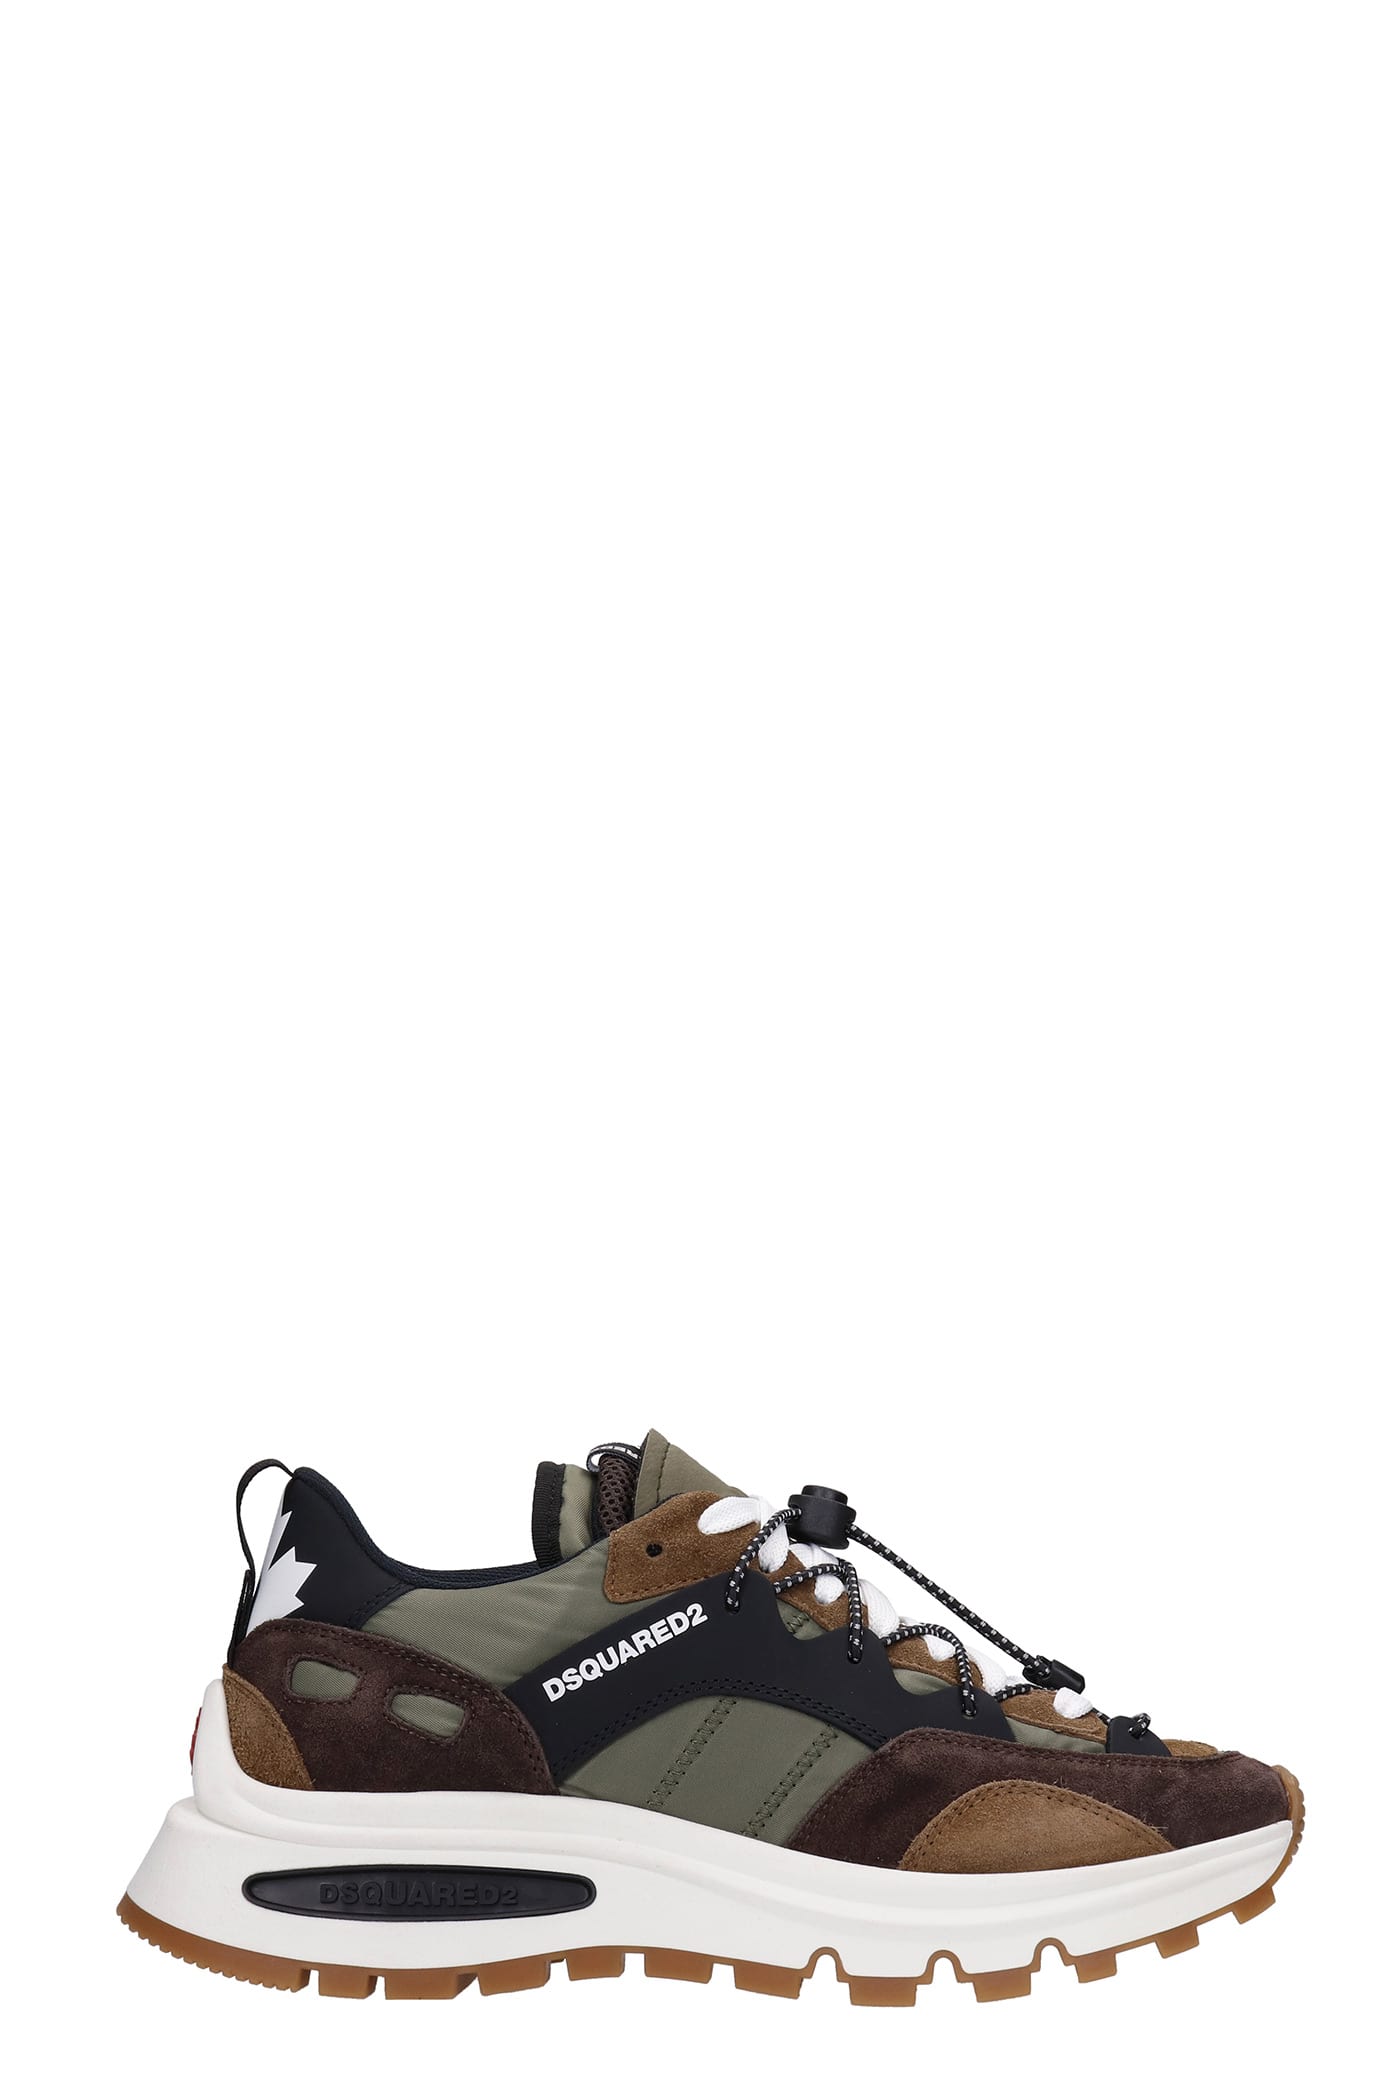 Dsquared2 Sneakers In Green Synthetic Fibers